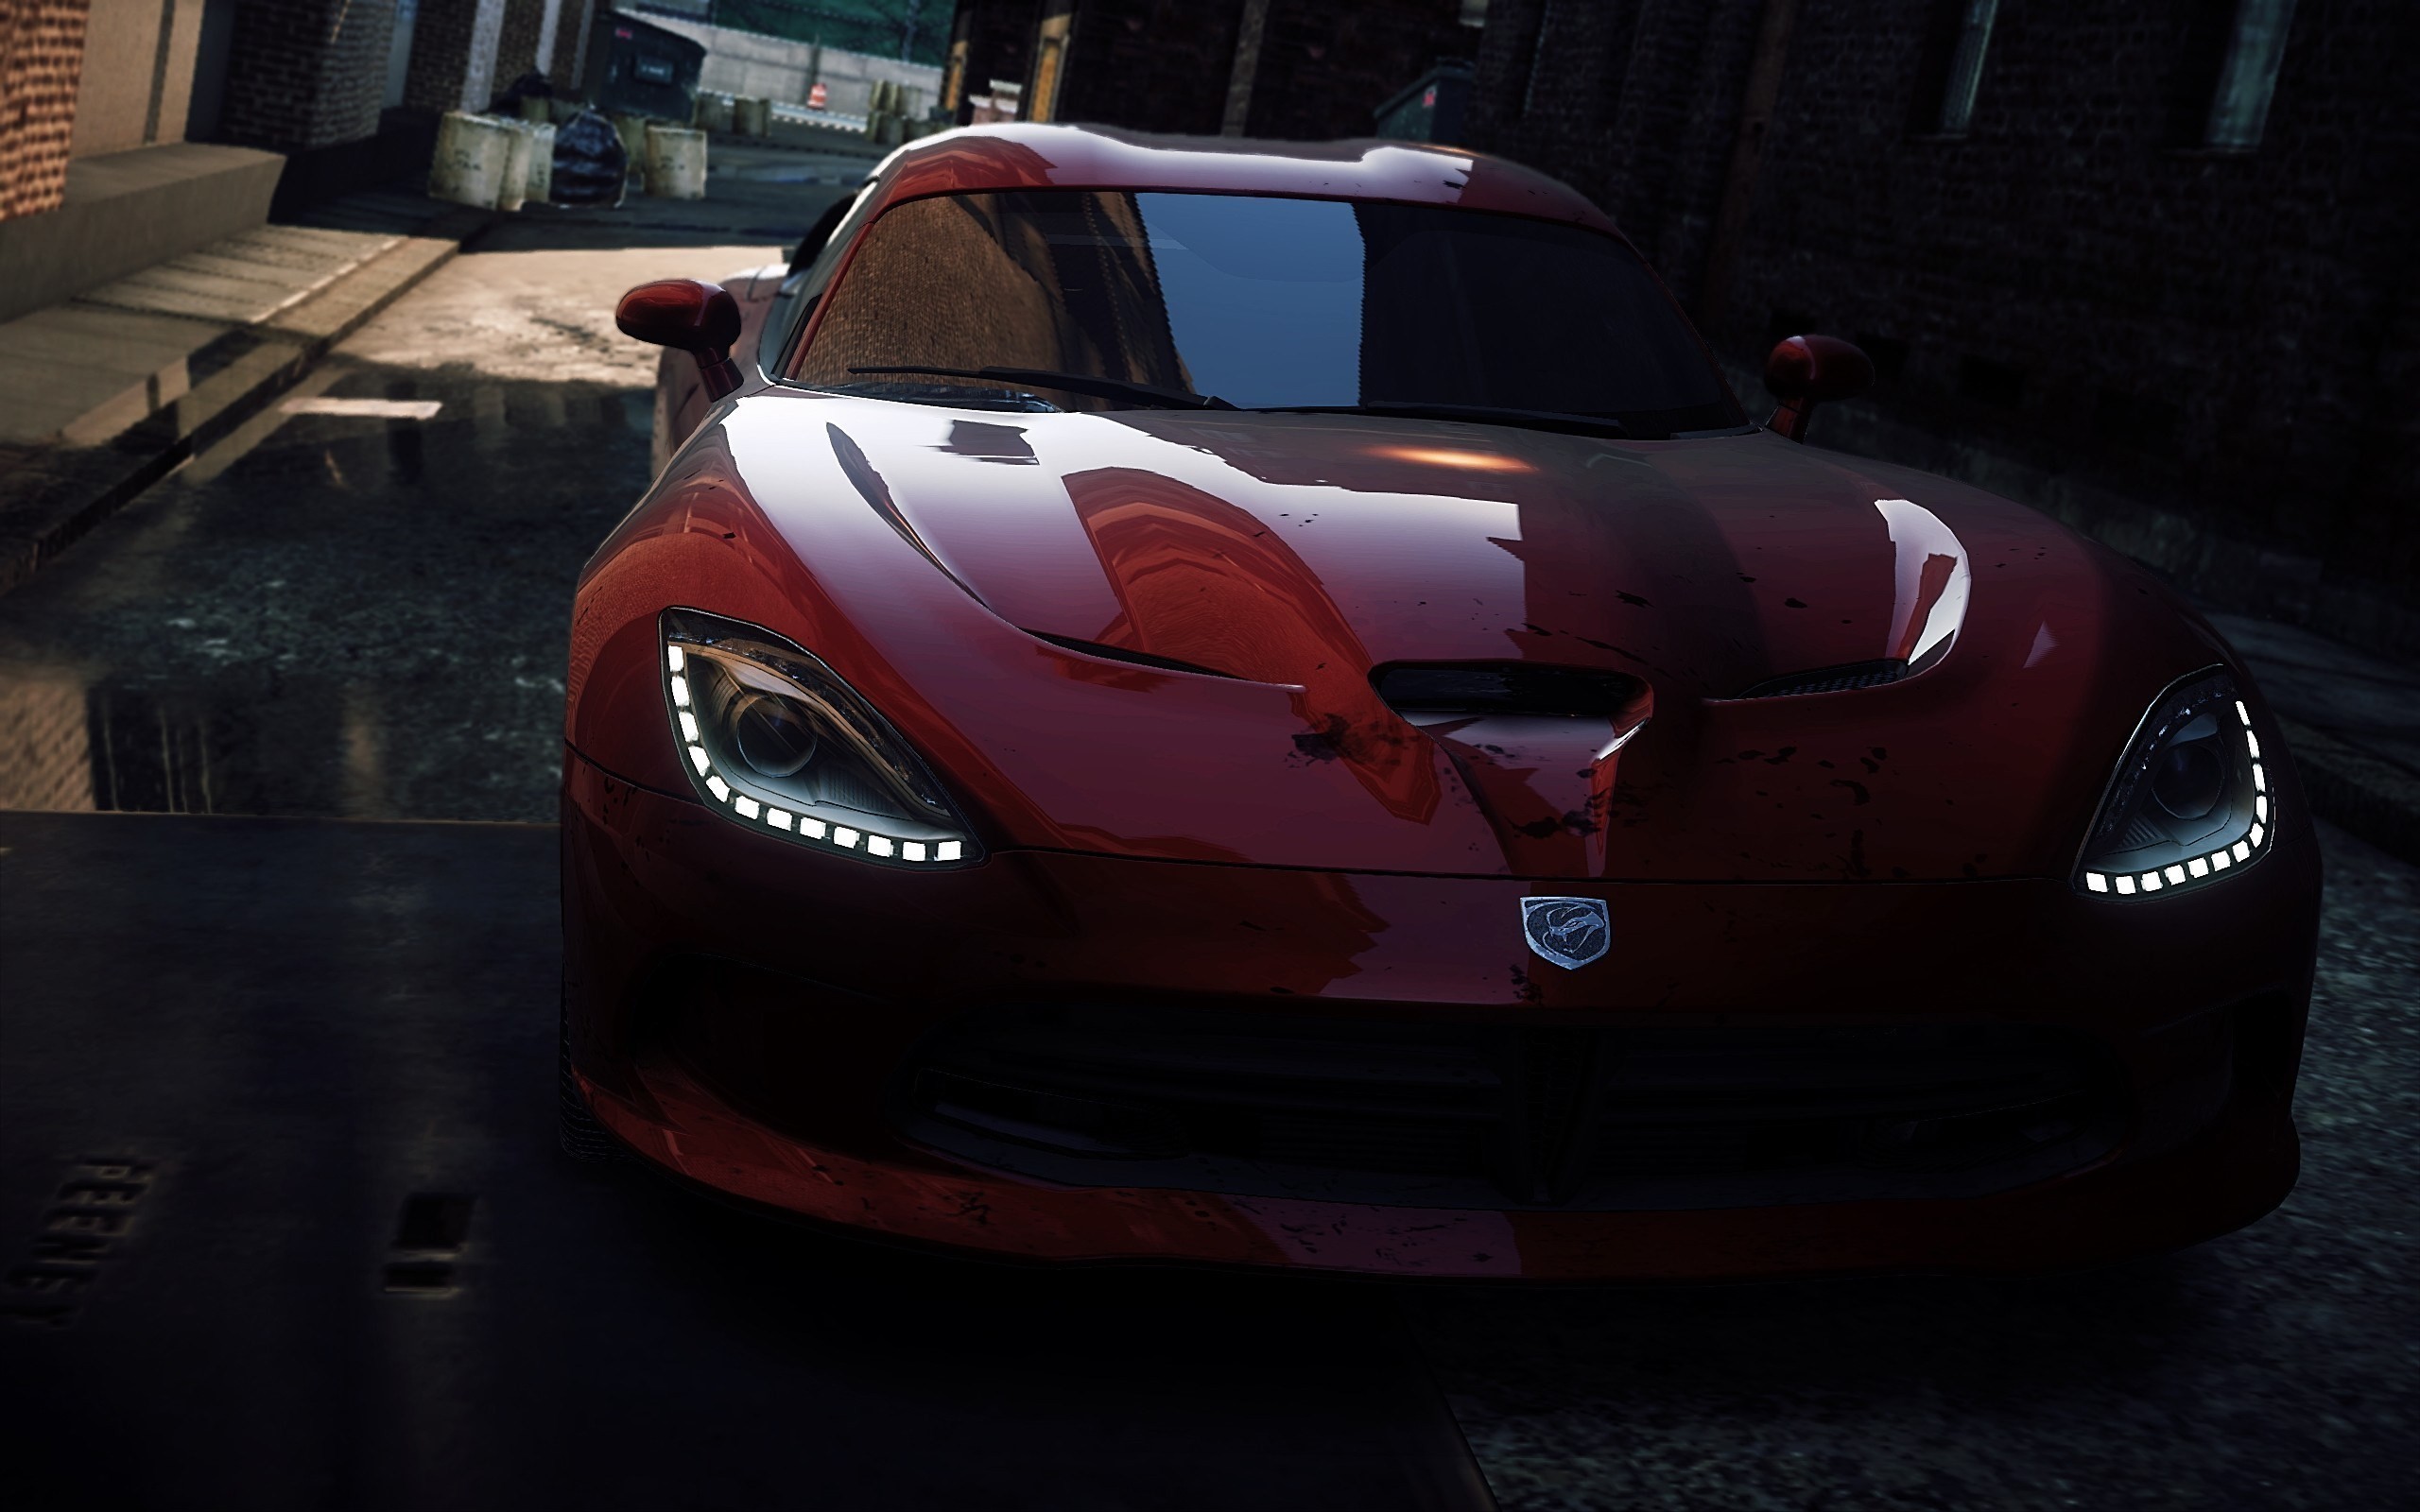 2560x1600 Need For Speed: Most Wanted Widescreen Wallpaper